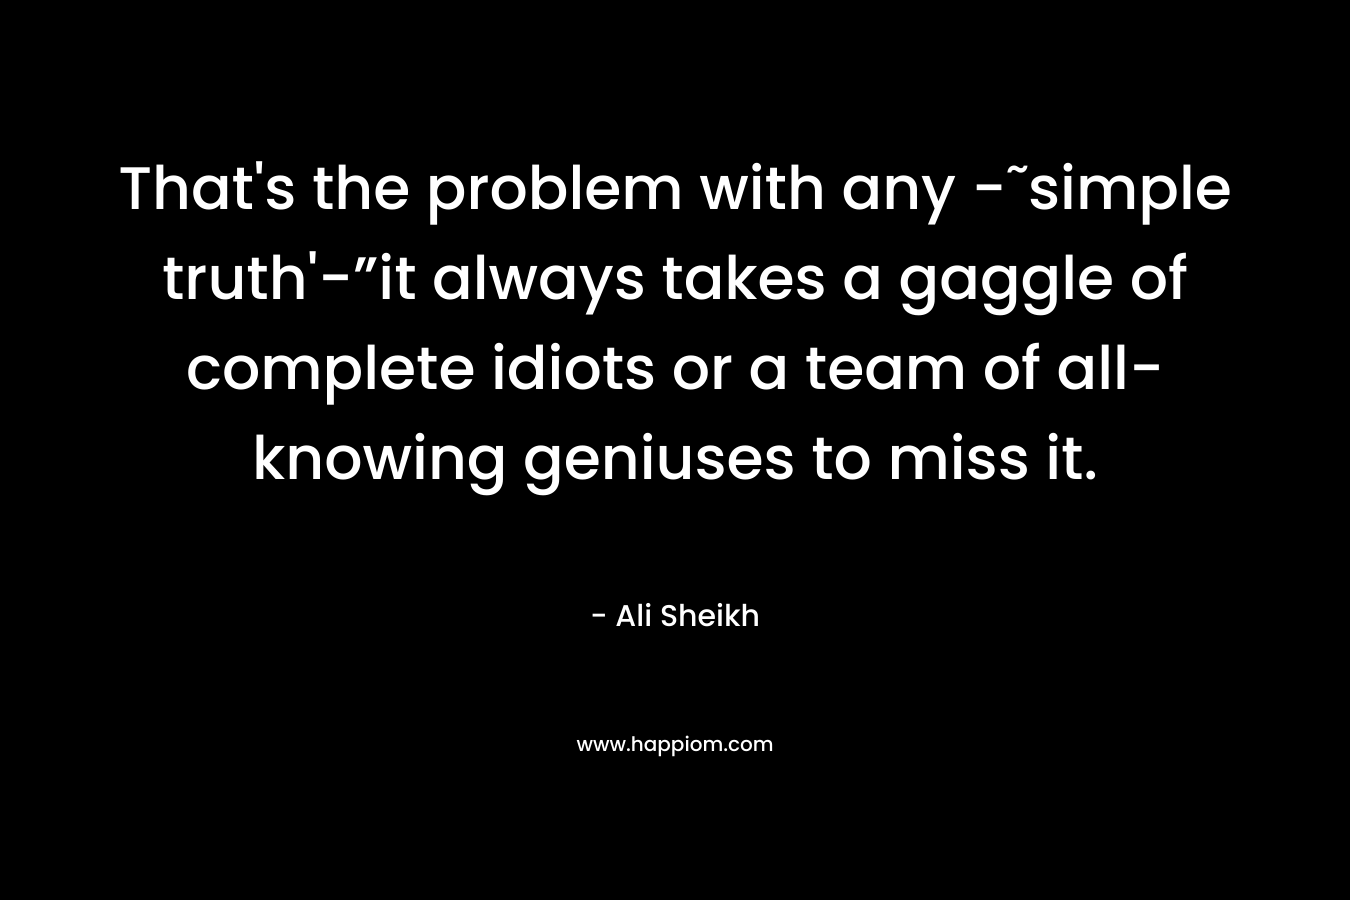 That’s the problem with any -˜simple truth’-”it always takes a gaggle of complete idiots or a team of all-knowing geniuses to miss it. – Ali Sheikh